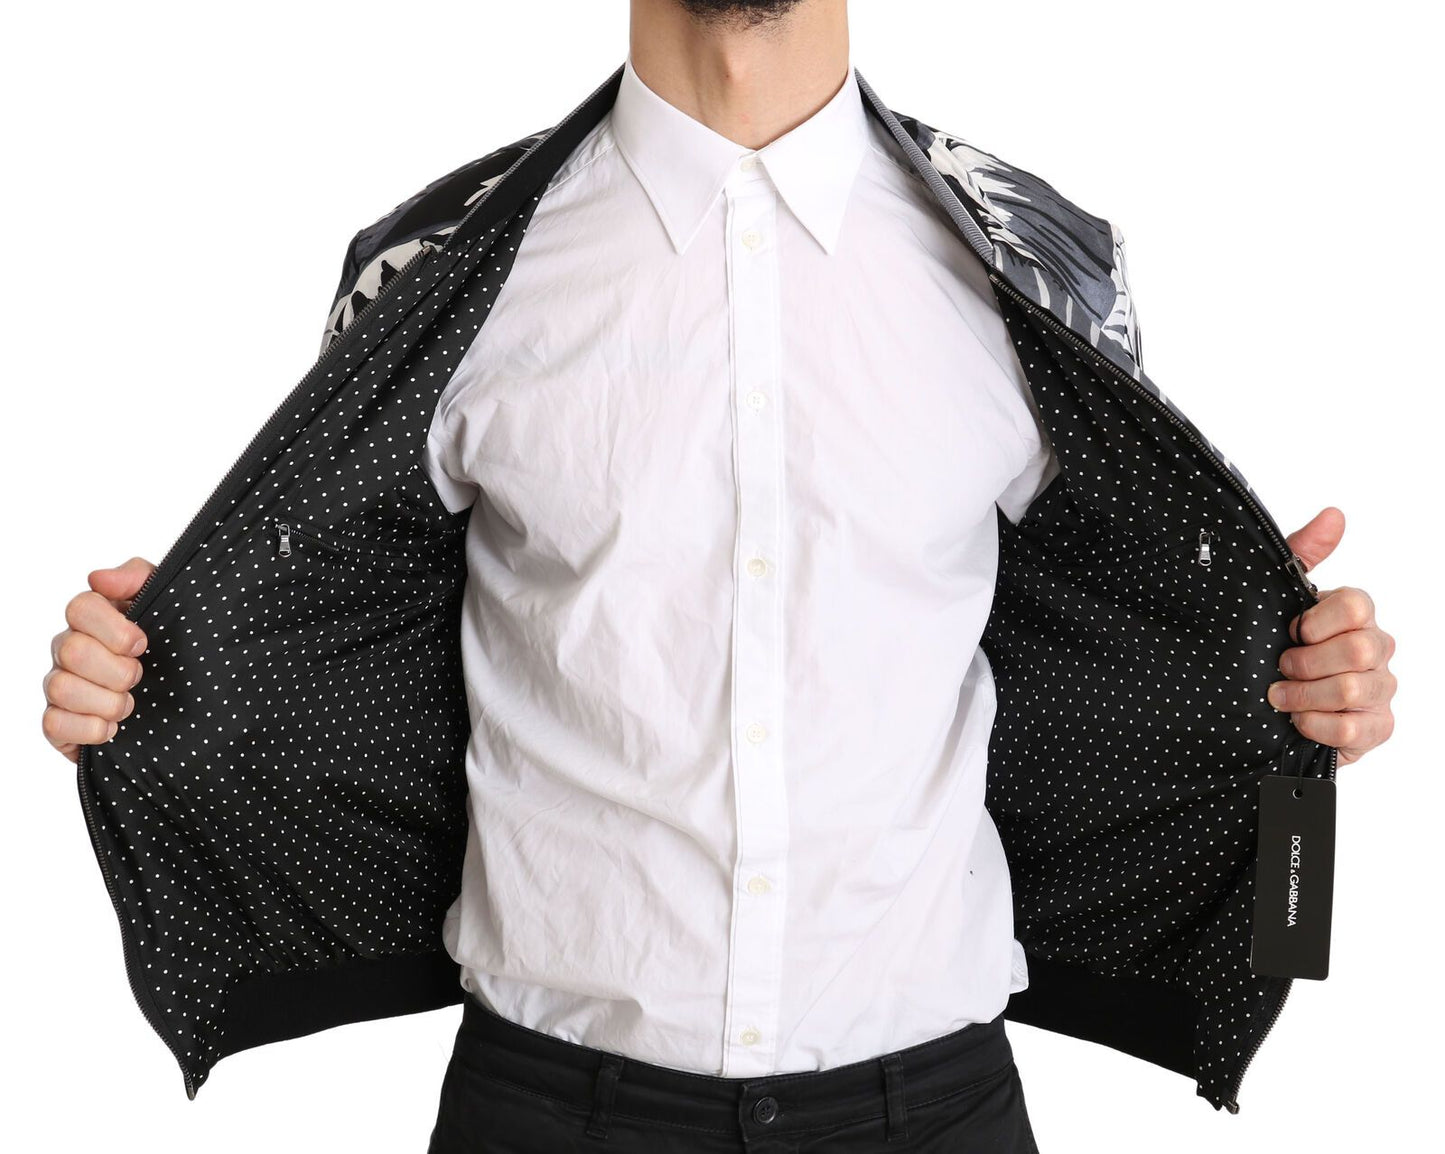 Black Silk Banana Leaf Print Bomber Jacket - Designed by Dolce & Gabbana Available to Buy at a Discounted Price on Moon Behind The Hill Online Designer Discount Store